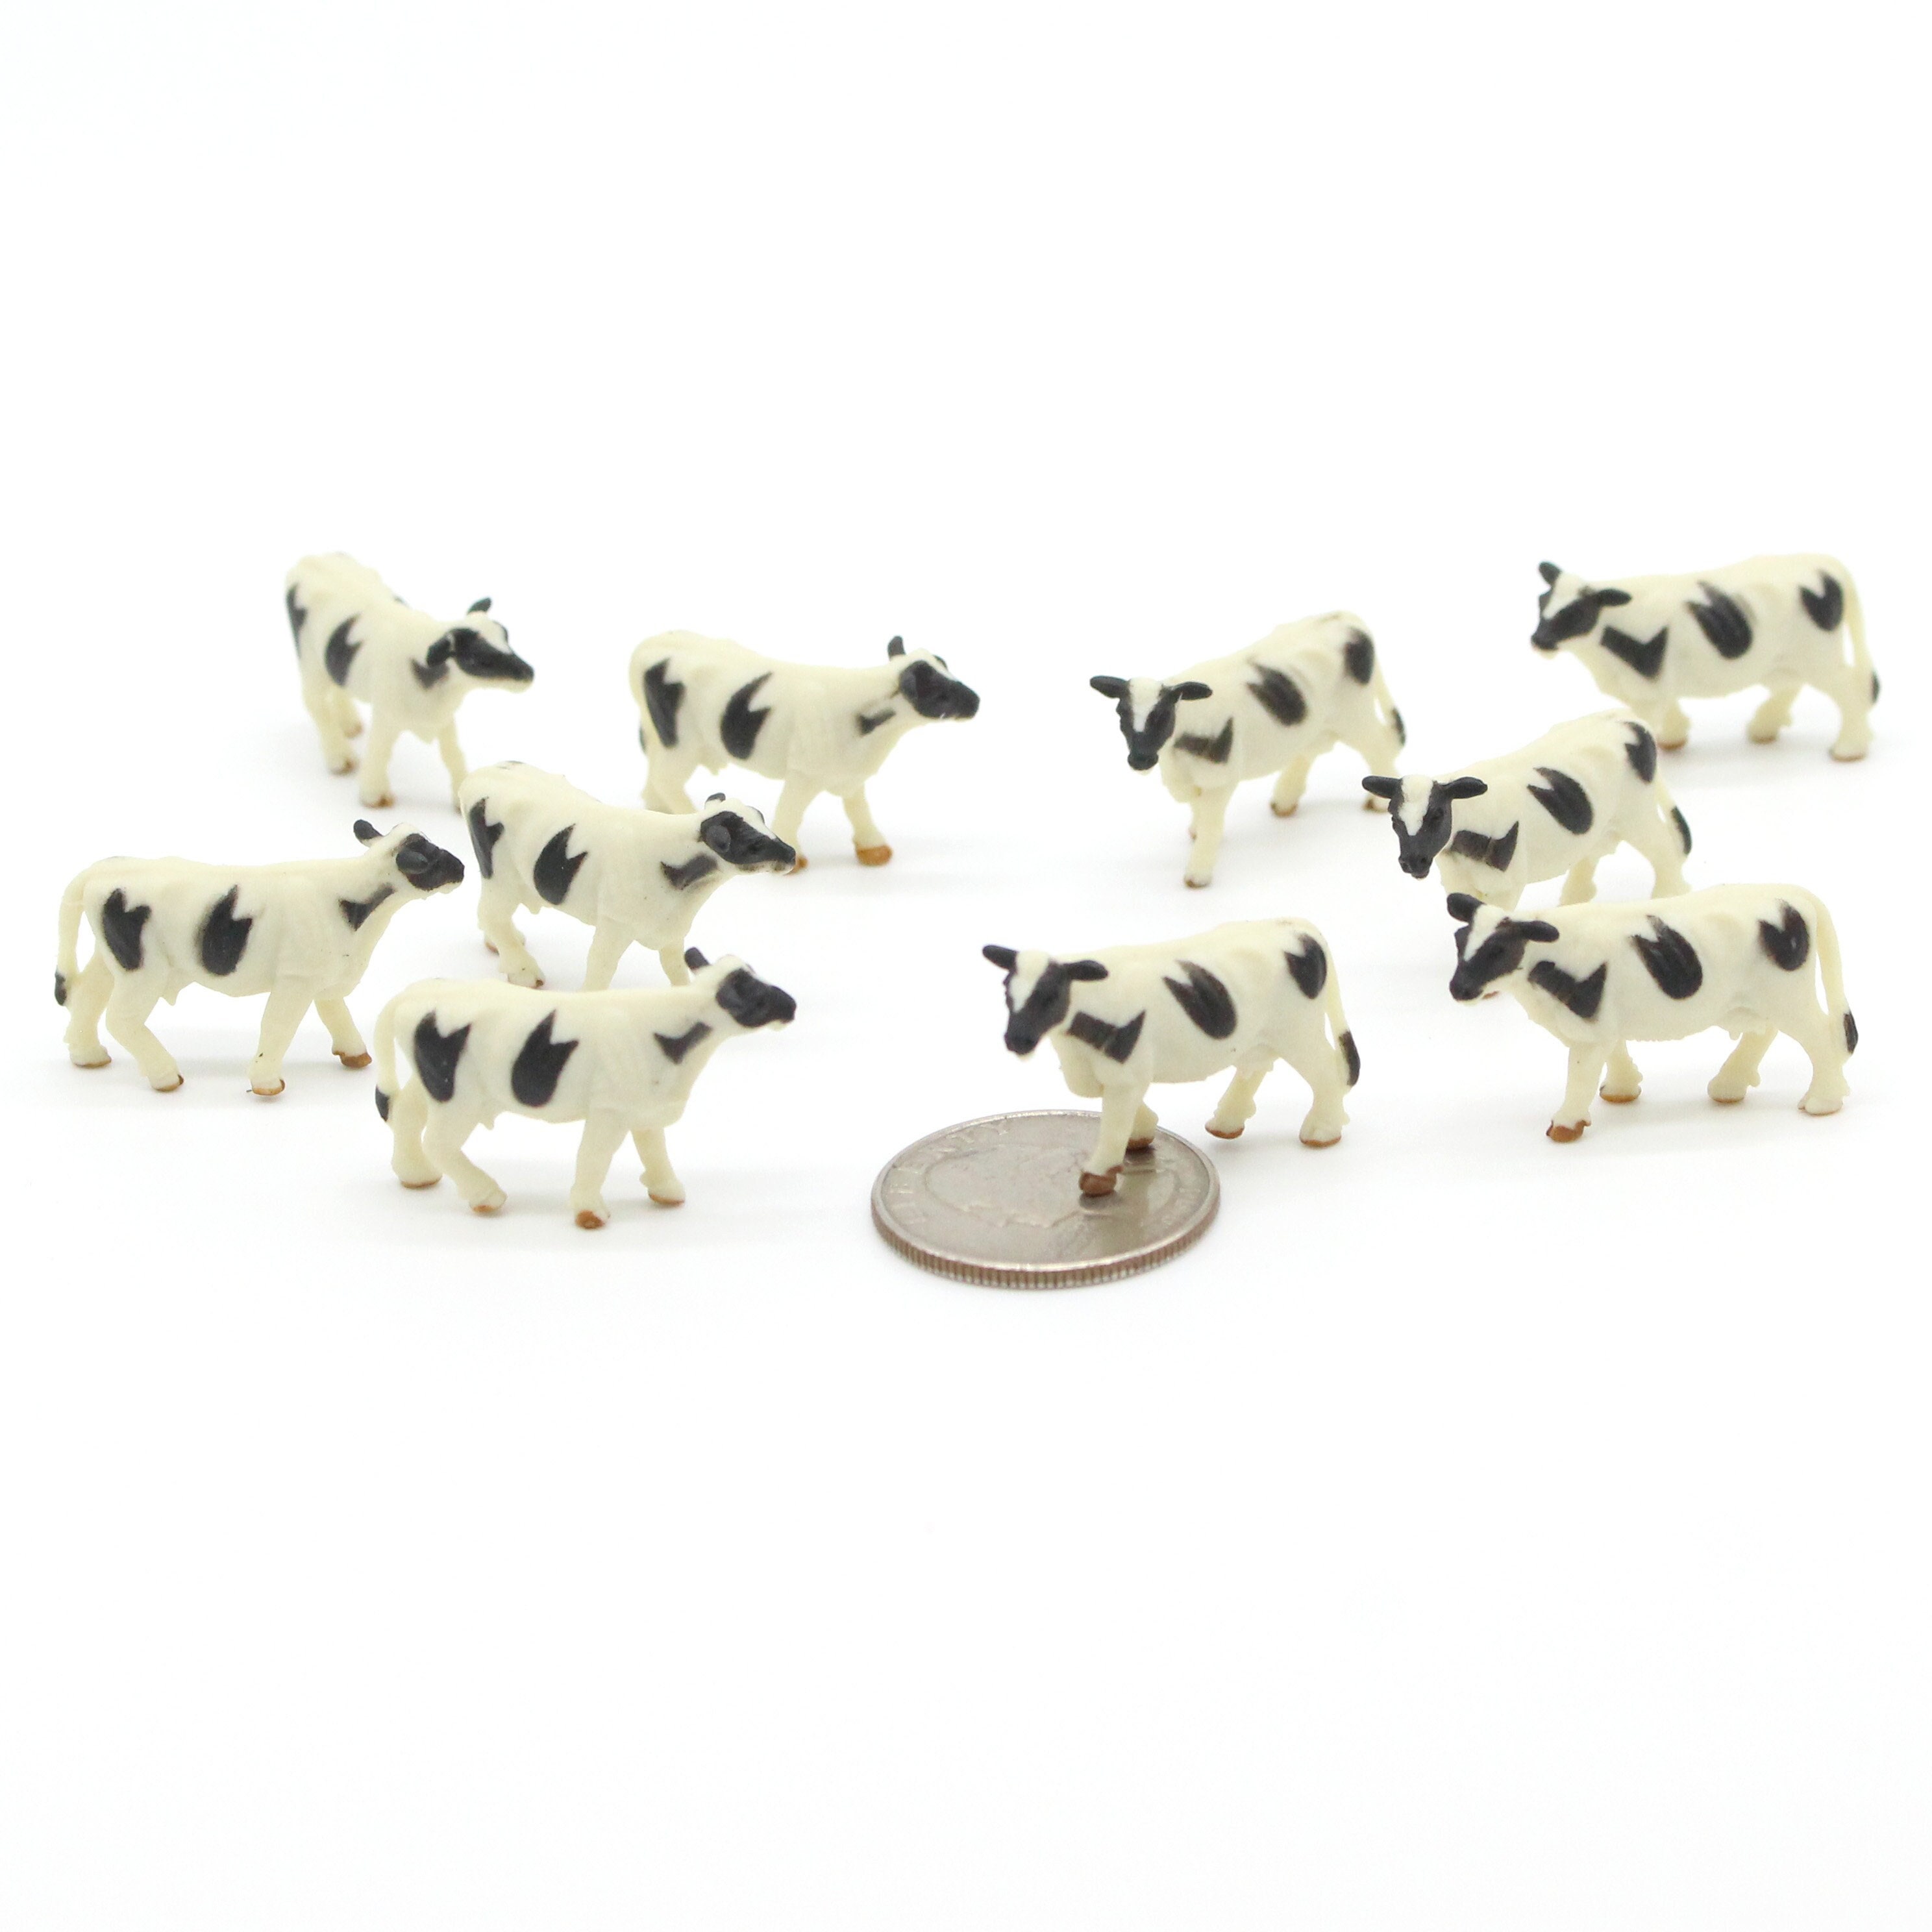  Purse Pets Micro Cow Purse Interactive Toy : Toys & Games